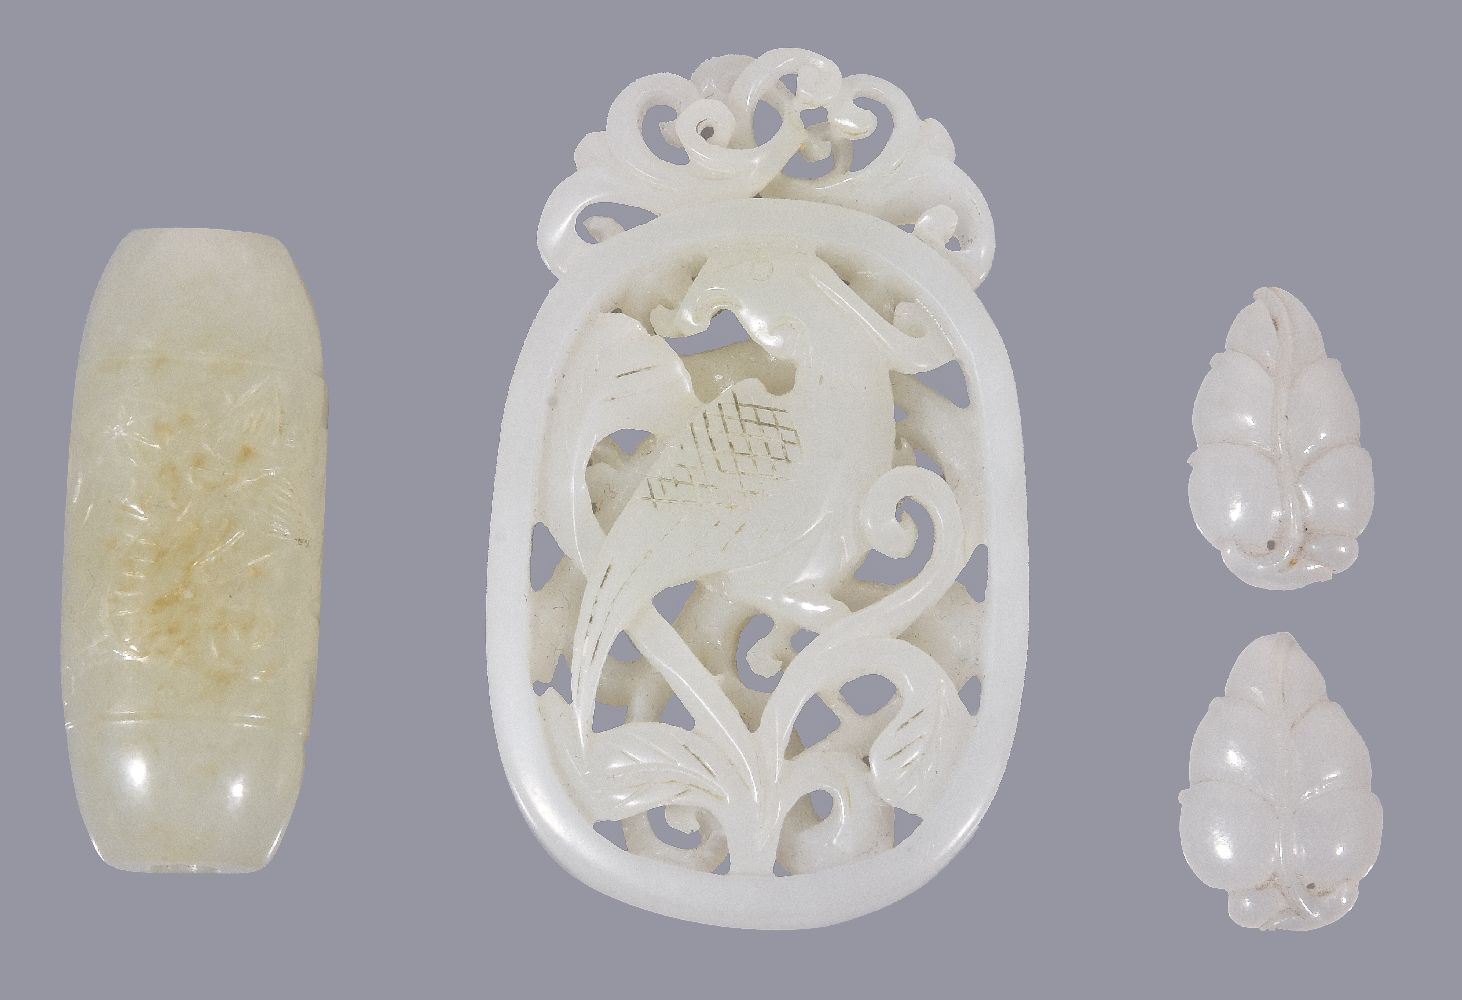 A Chinese white jade openwork pendant, carved with a bird amongst scrolling foliage, incised